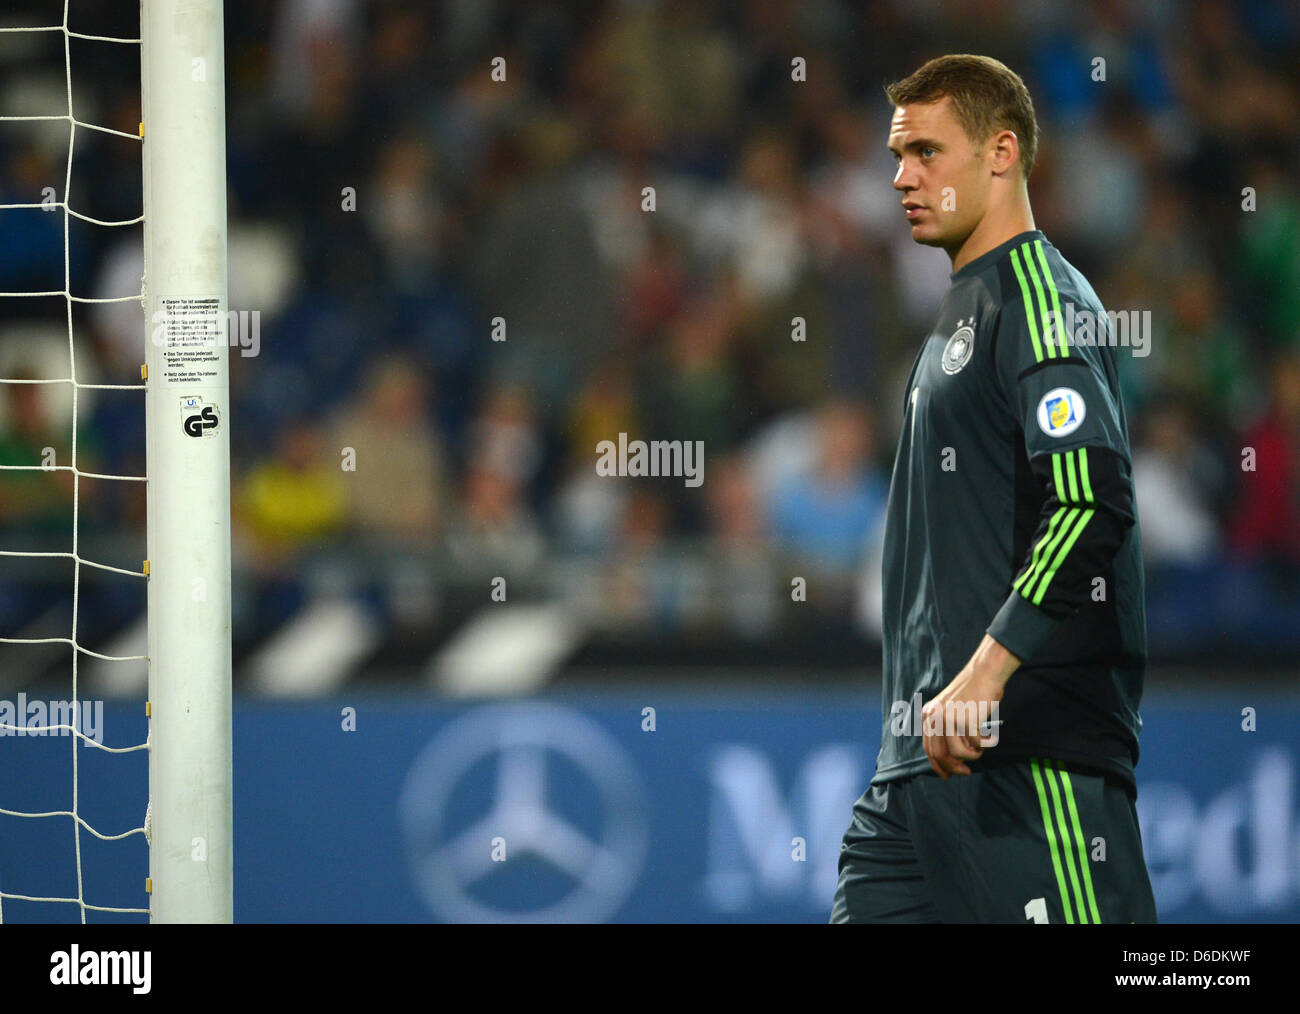 Germany's goalkeeper Manuel Neuer grimaces during the Group C FIFA World Cup 2014 qualifying match Germany vs Faroe Islands at AWD Arena in Hanover, Germany, 07 September 2012. Germany won 3:0. Photo: Marcus Brandt Stock Photo